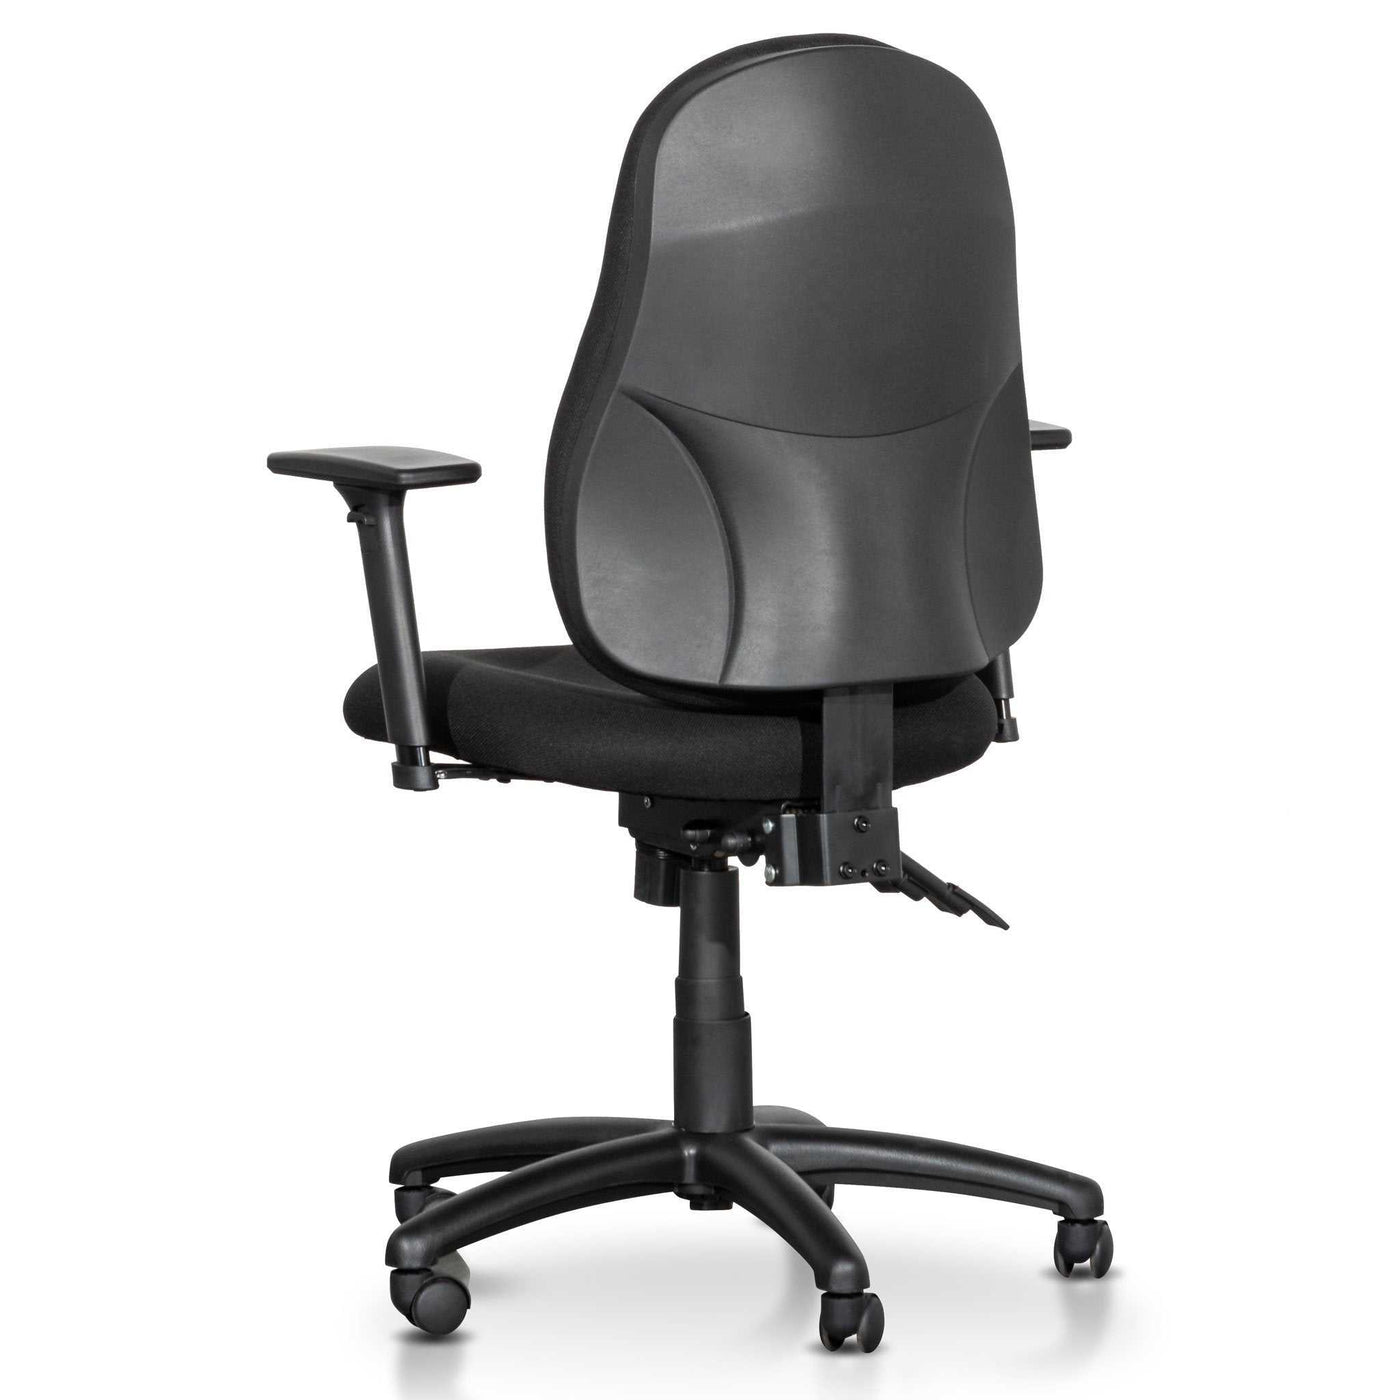 High Back Fabric Office Chair - Black